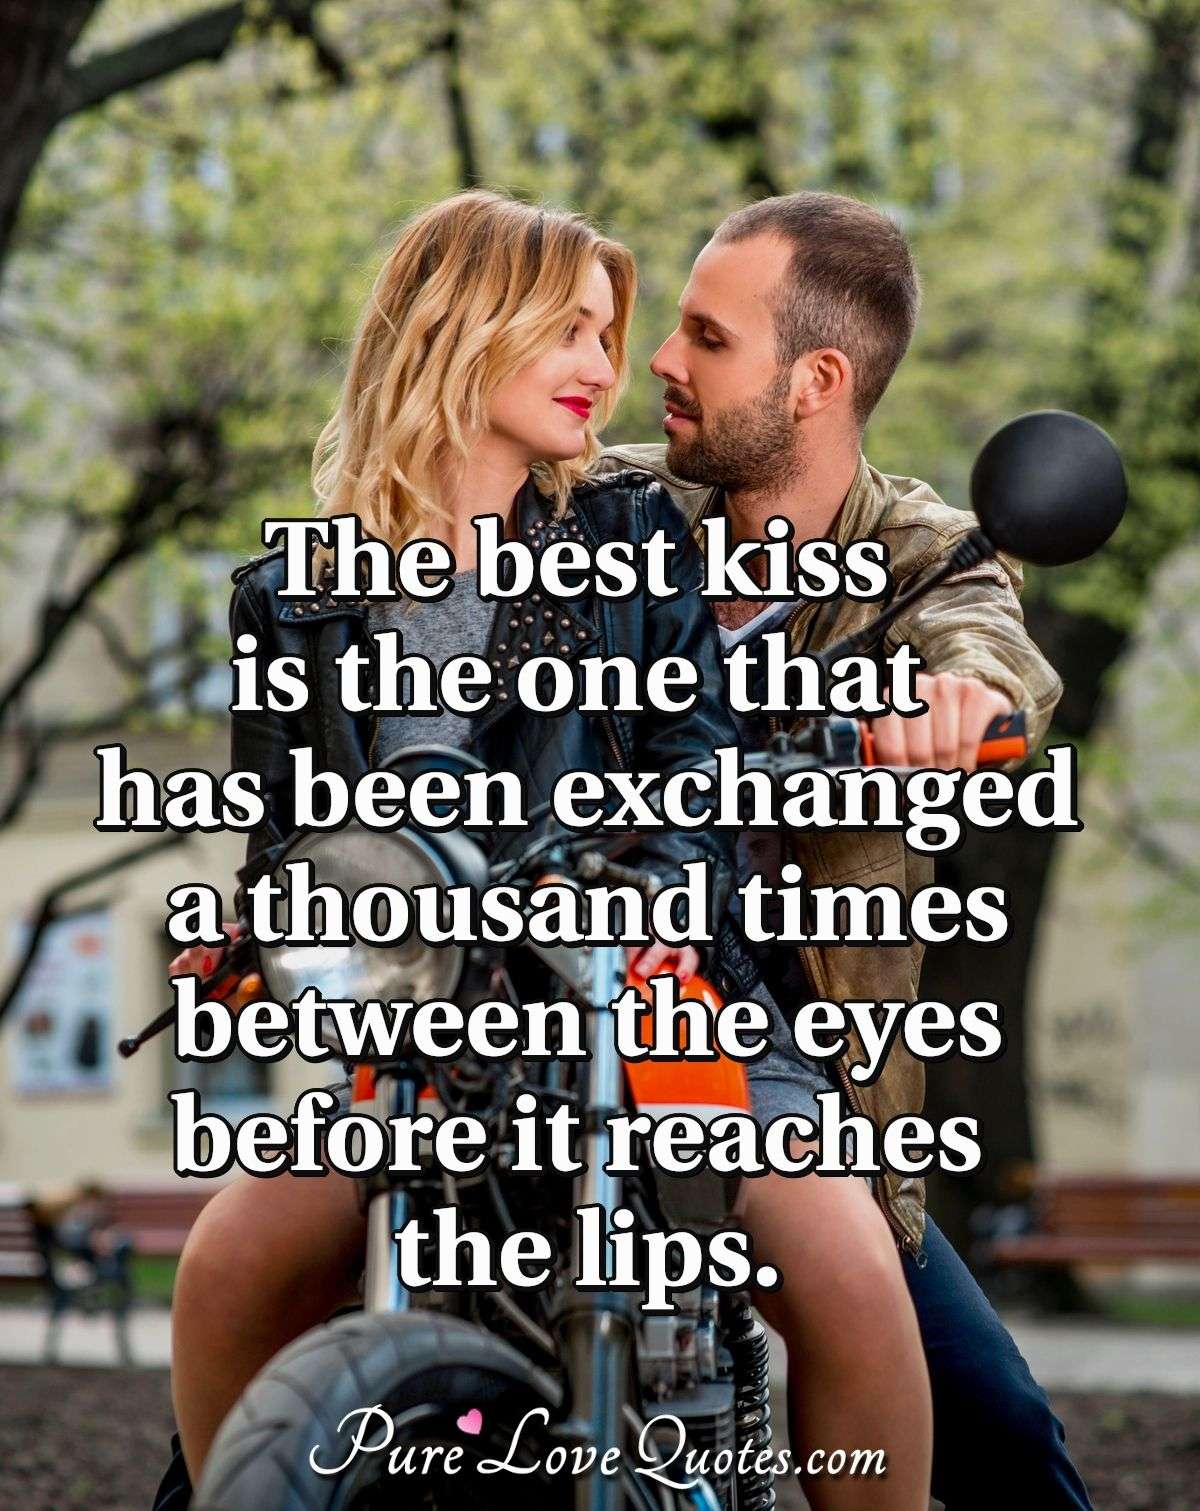 The best kiss is the one that has been exchanged a thousand times between the eyes before it reaches the lips. - Anonymous